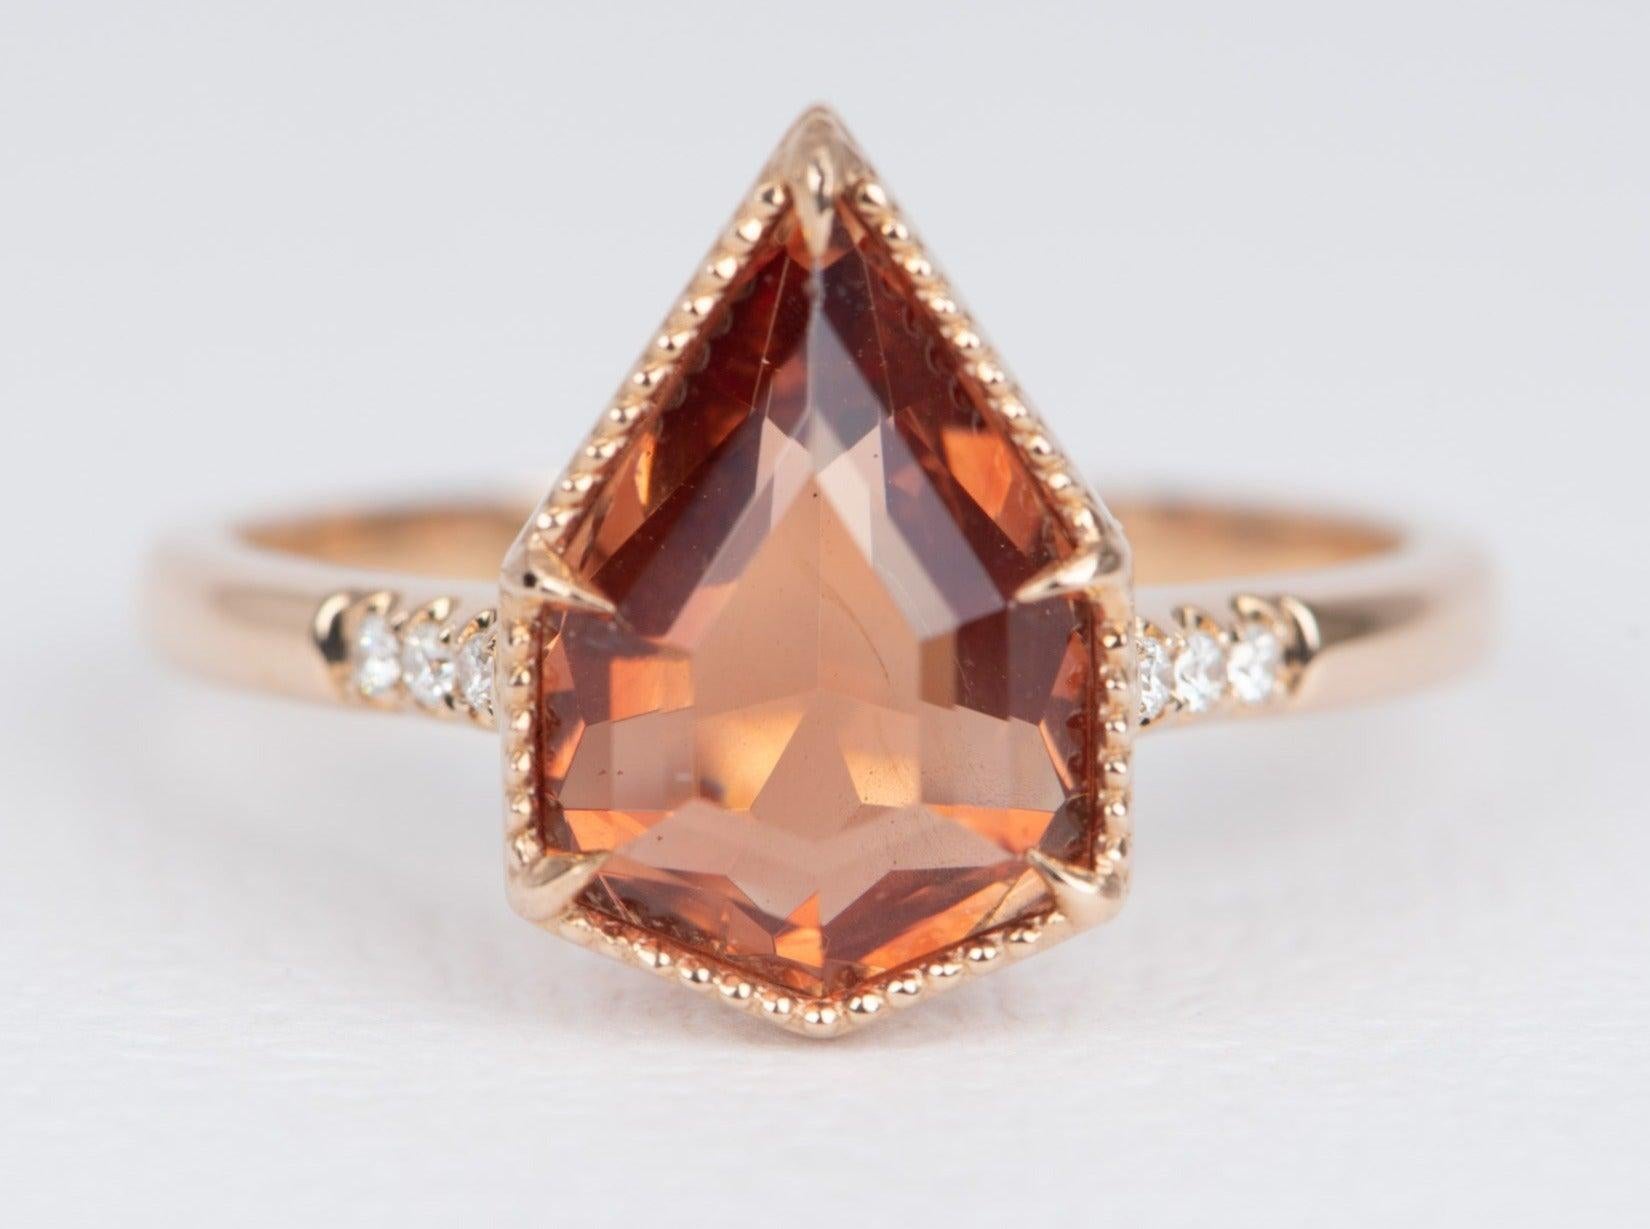 ♥ This is a statement ring featuring a large shield-shaped Oregon sunstone and diamond accents on the band

♥ This stone is purchased directly from the mine owner who mined and faceted this gemstone from his Oregon sunstone mine. This stone is fully